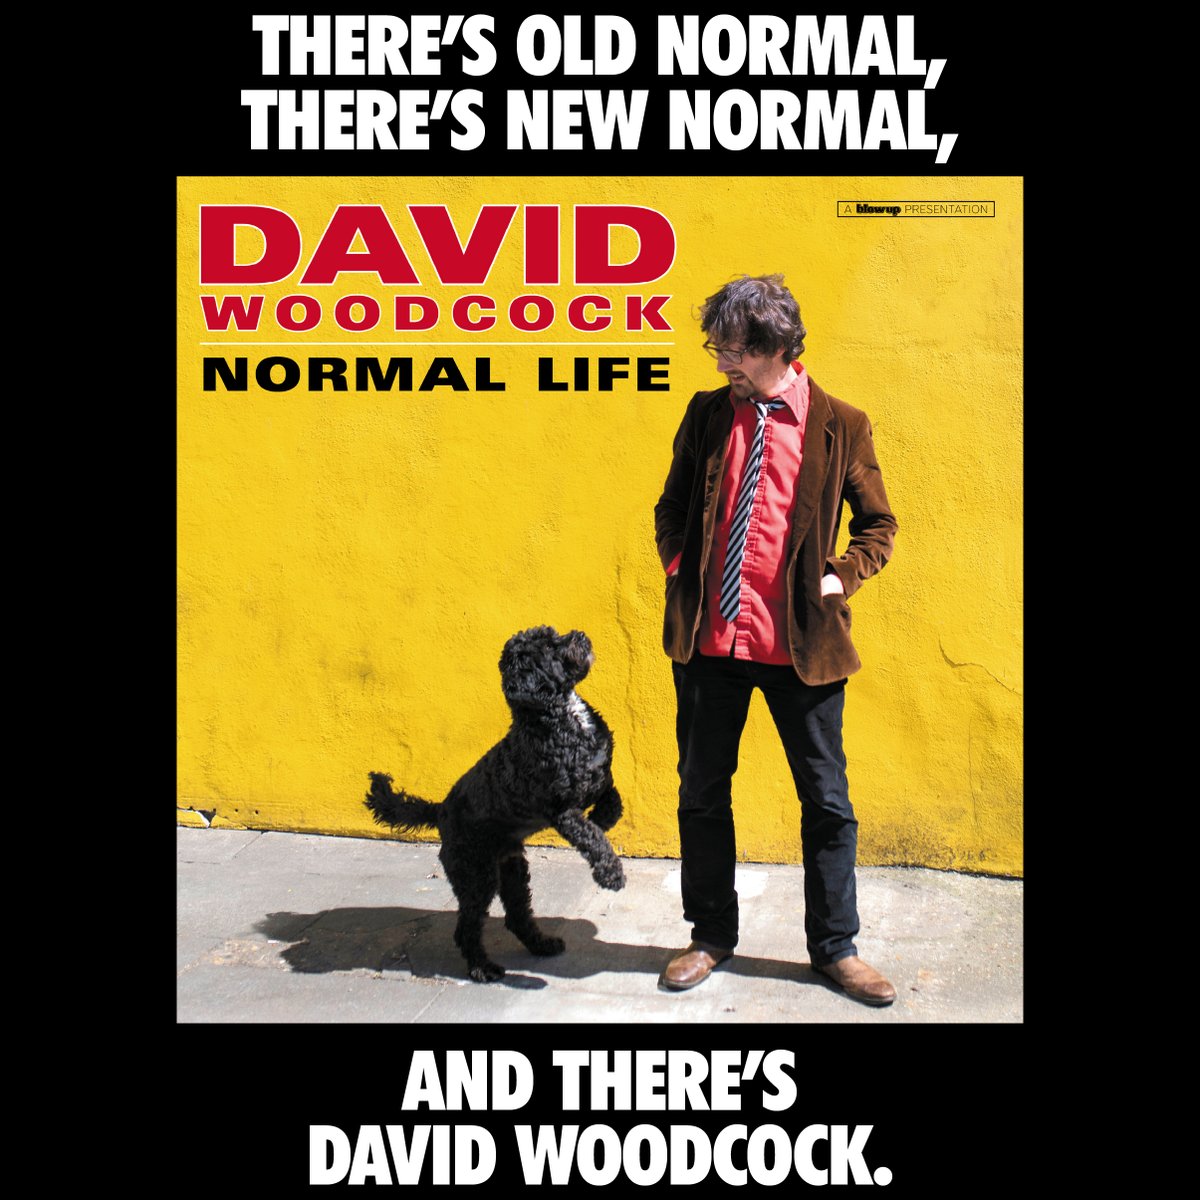 Tonight 9pm GMT @LeezaLondon radio show is playing a selection of @DWoodcock_Music tracks @IndieFmRadio broadcasting from #California tune in radioking.com/radio/the-inde… #normallife out now! #britishmusic #californiamusic #NewNormal #songwriter #southend #indiemusic #DavidBowie